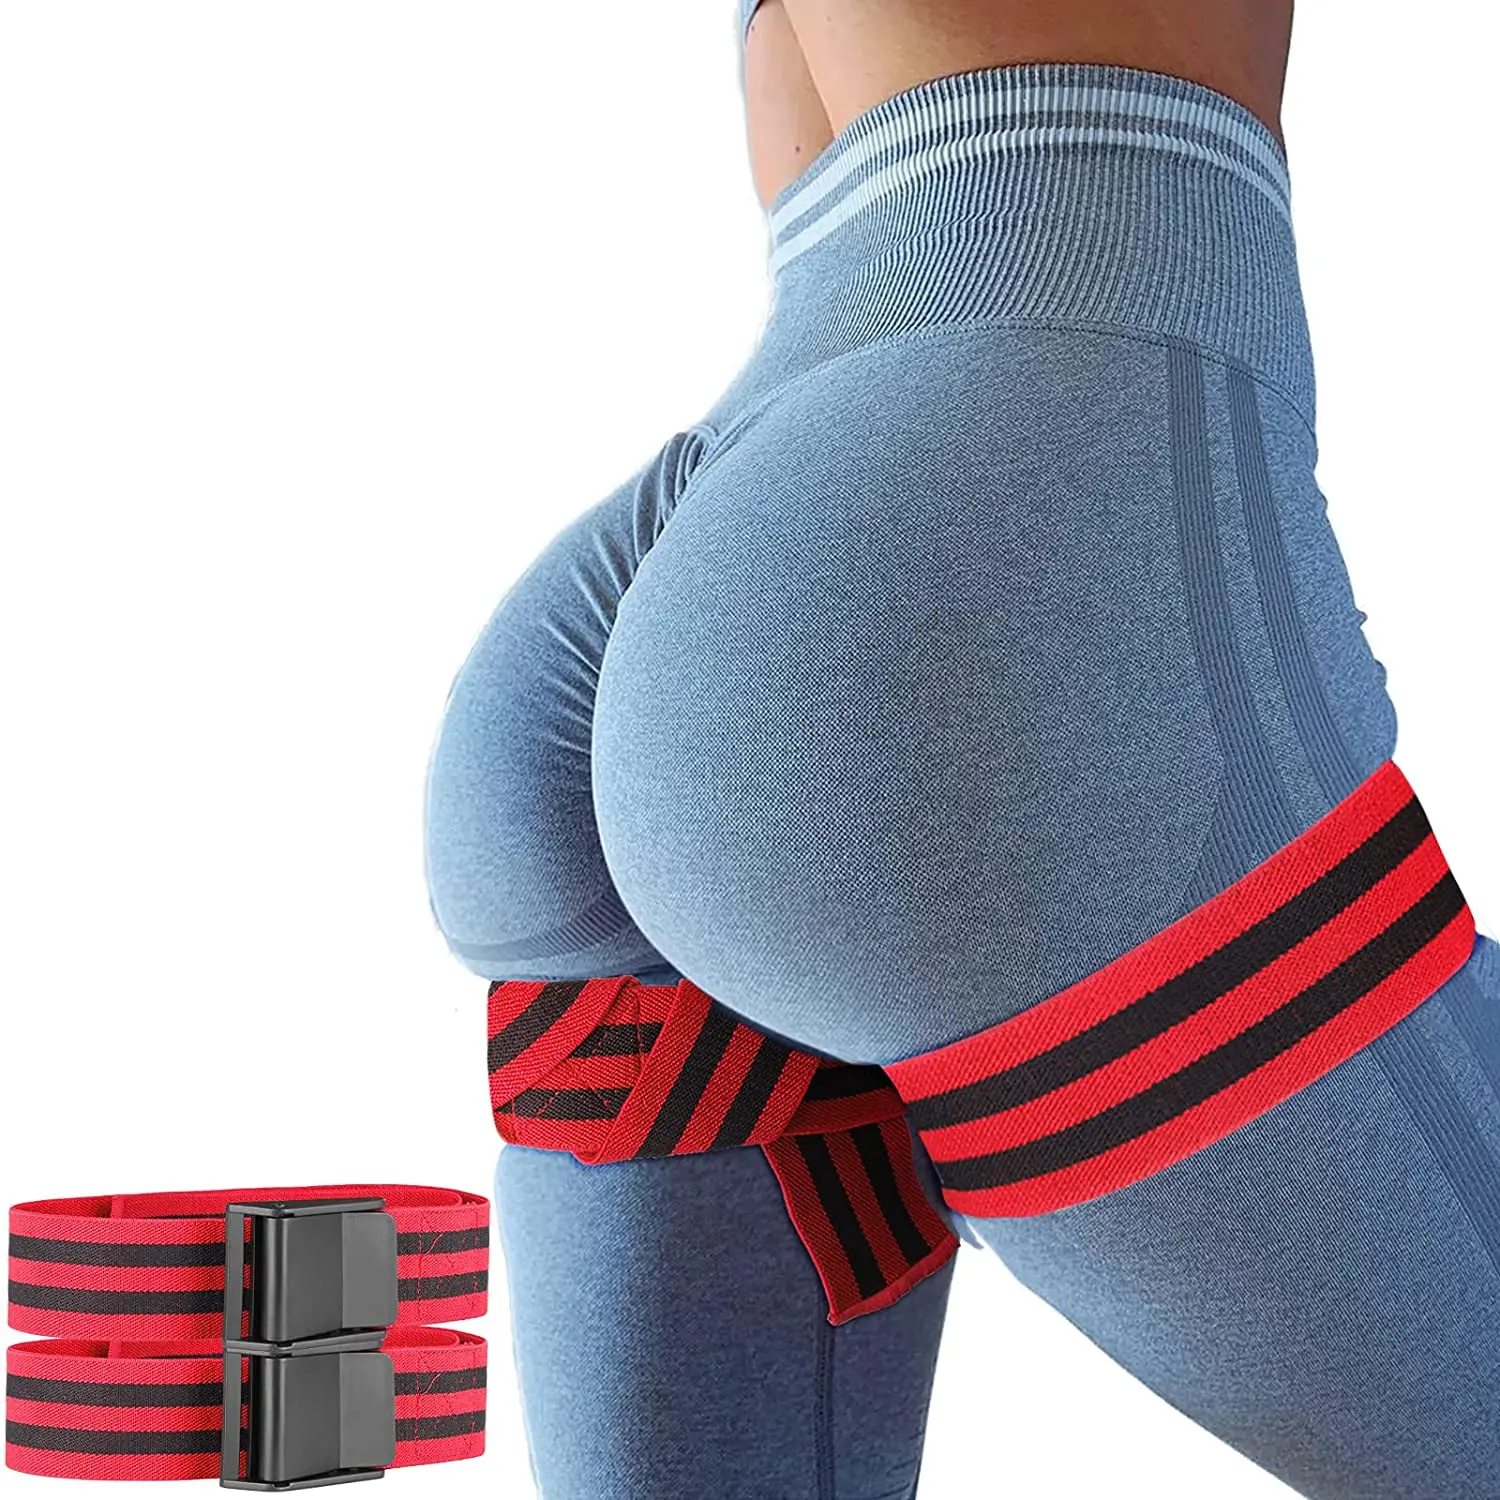 

Fitness arm and thigh muscle belt weight lifting BFR bands occlusion training glute bands blood flow restriction arm butt bands, Black,wine red,brown